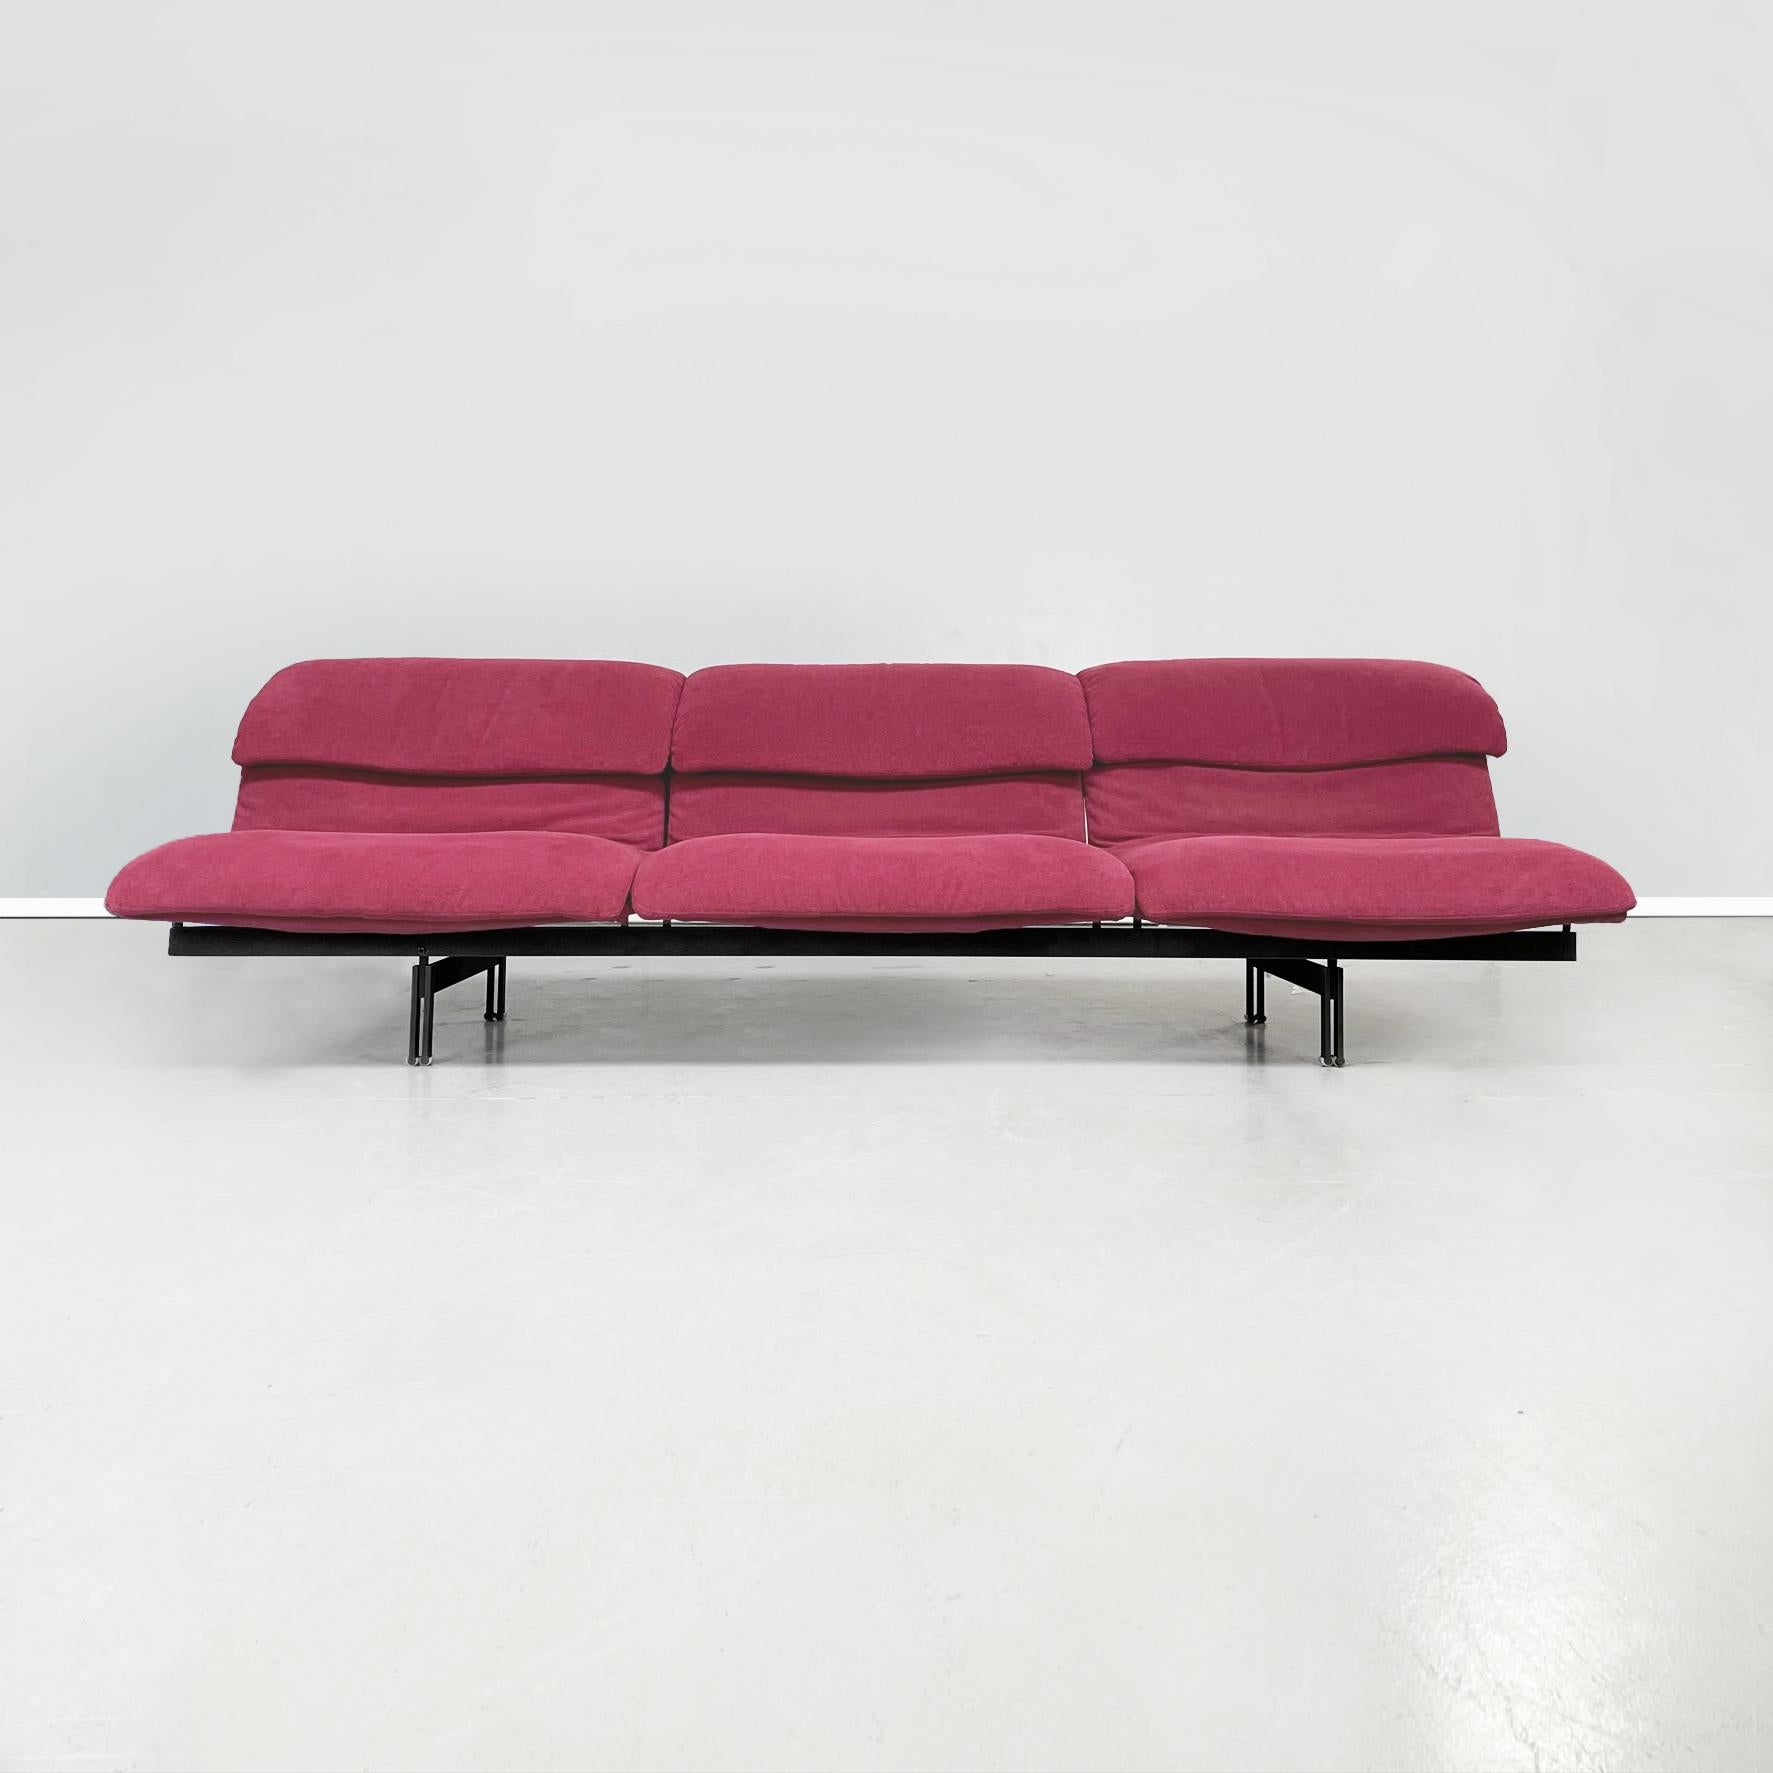 Italian mid-century 3 seater sofa Wave by Giovanni Offredi for Saporiti, 1970s
Three seater sofa mod. Wave with rectangular seat. The seat and back are made up of curved cushions, padded and upholstered in red / purple fabric. The structure is made